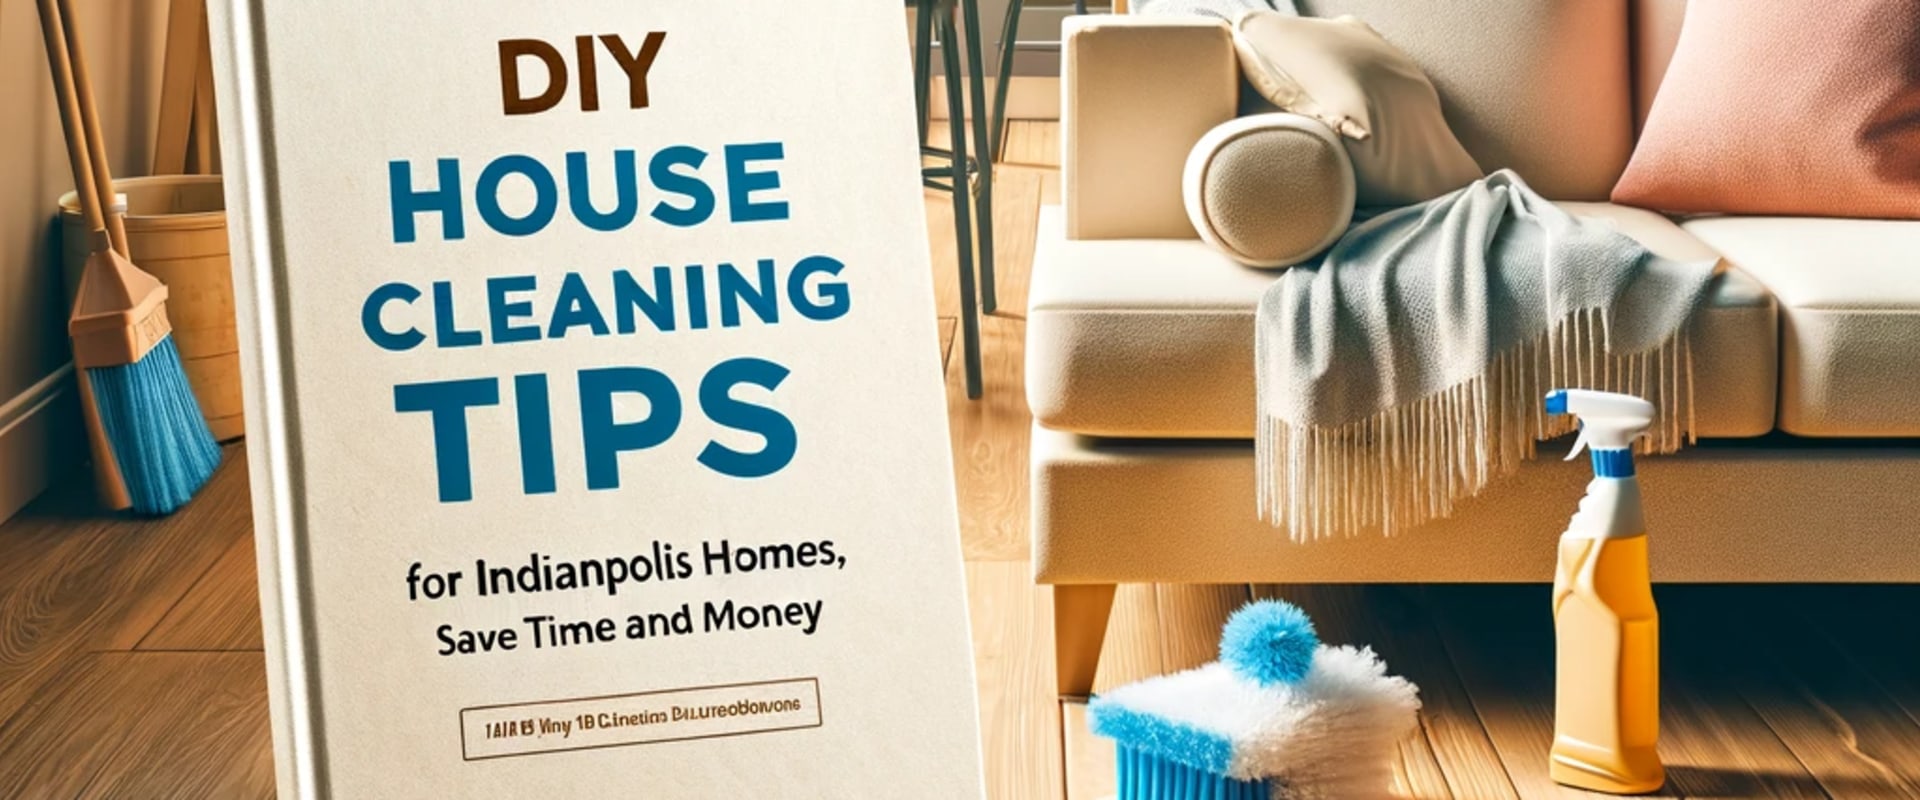 DIY House Cleaning Tips for Indianapolis Homes: Save Time and Money